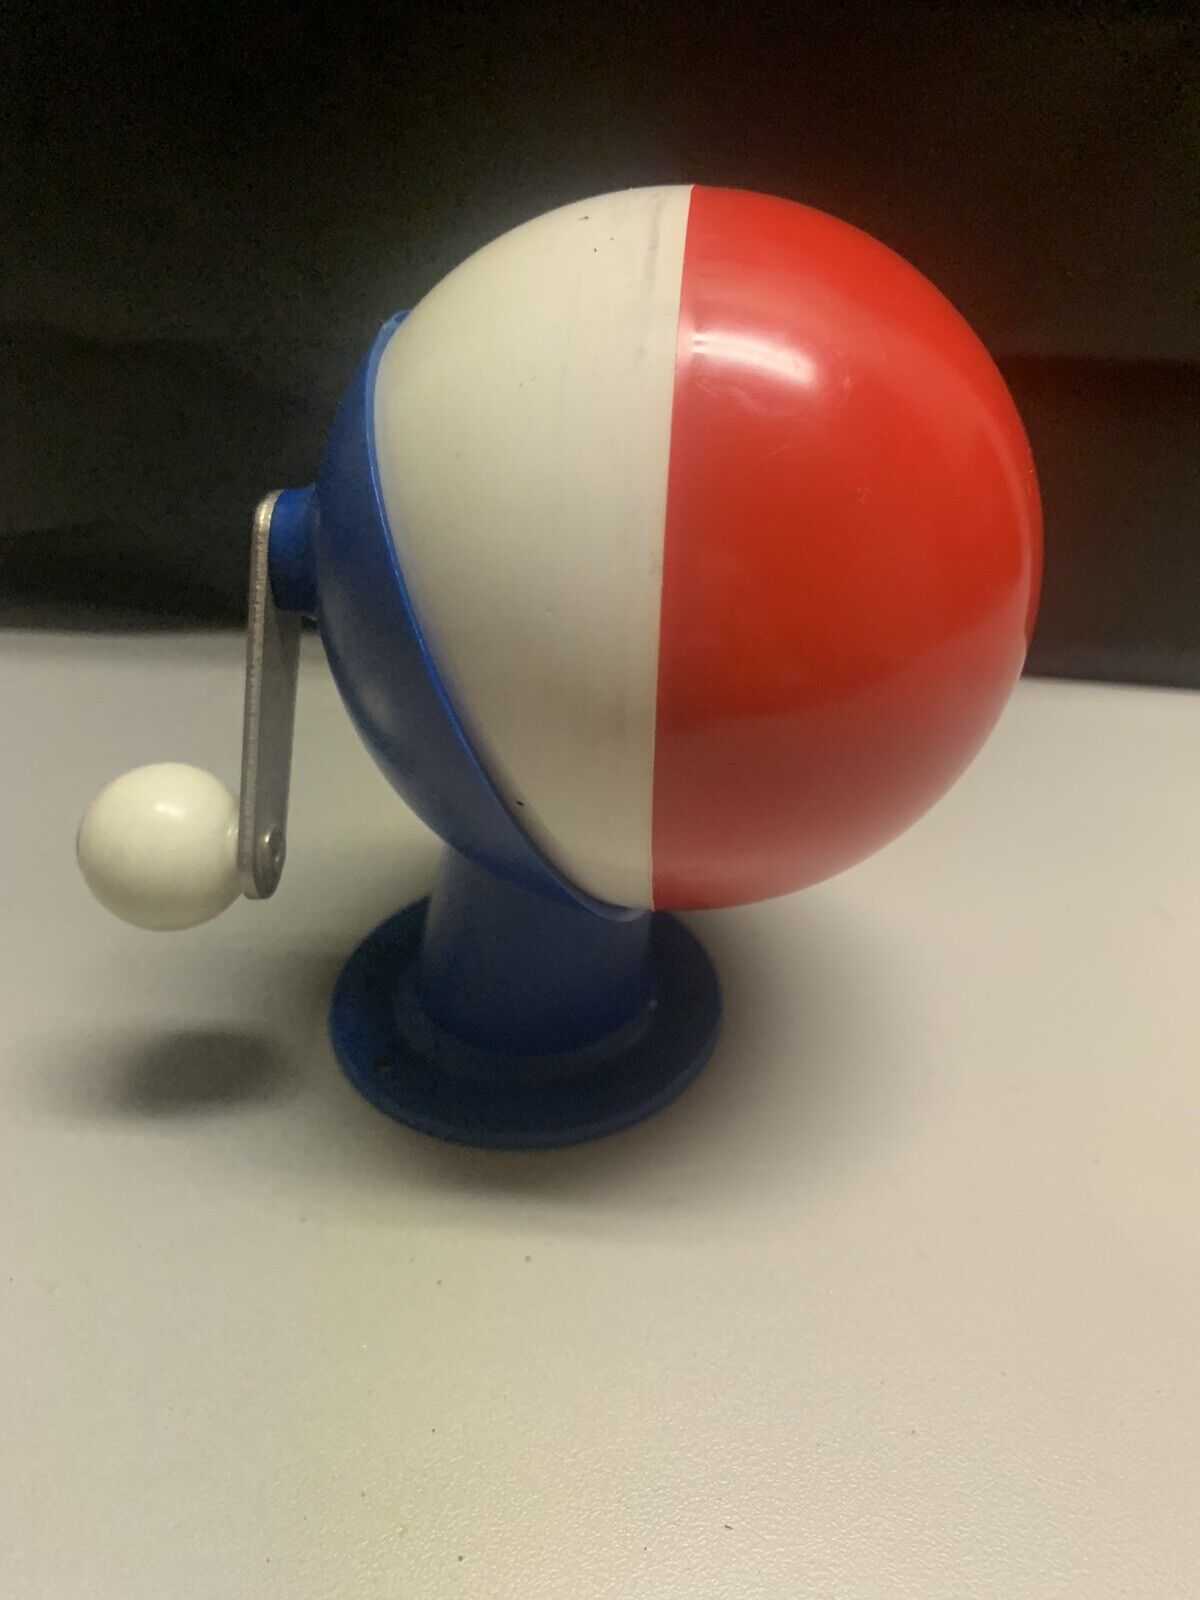 Vintage 1970s Berol red-white-blue ball Pencil Sharpener Made in USA Retro